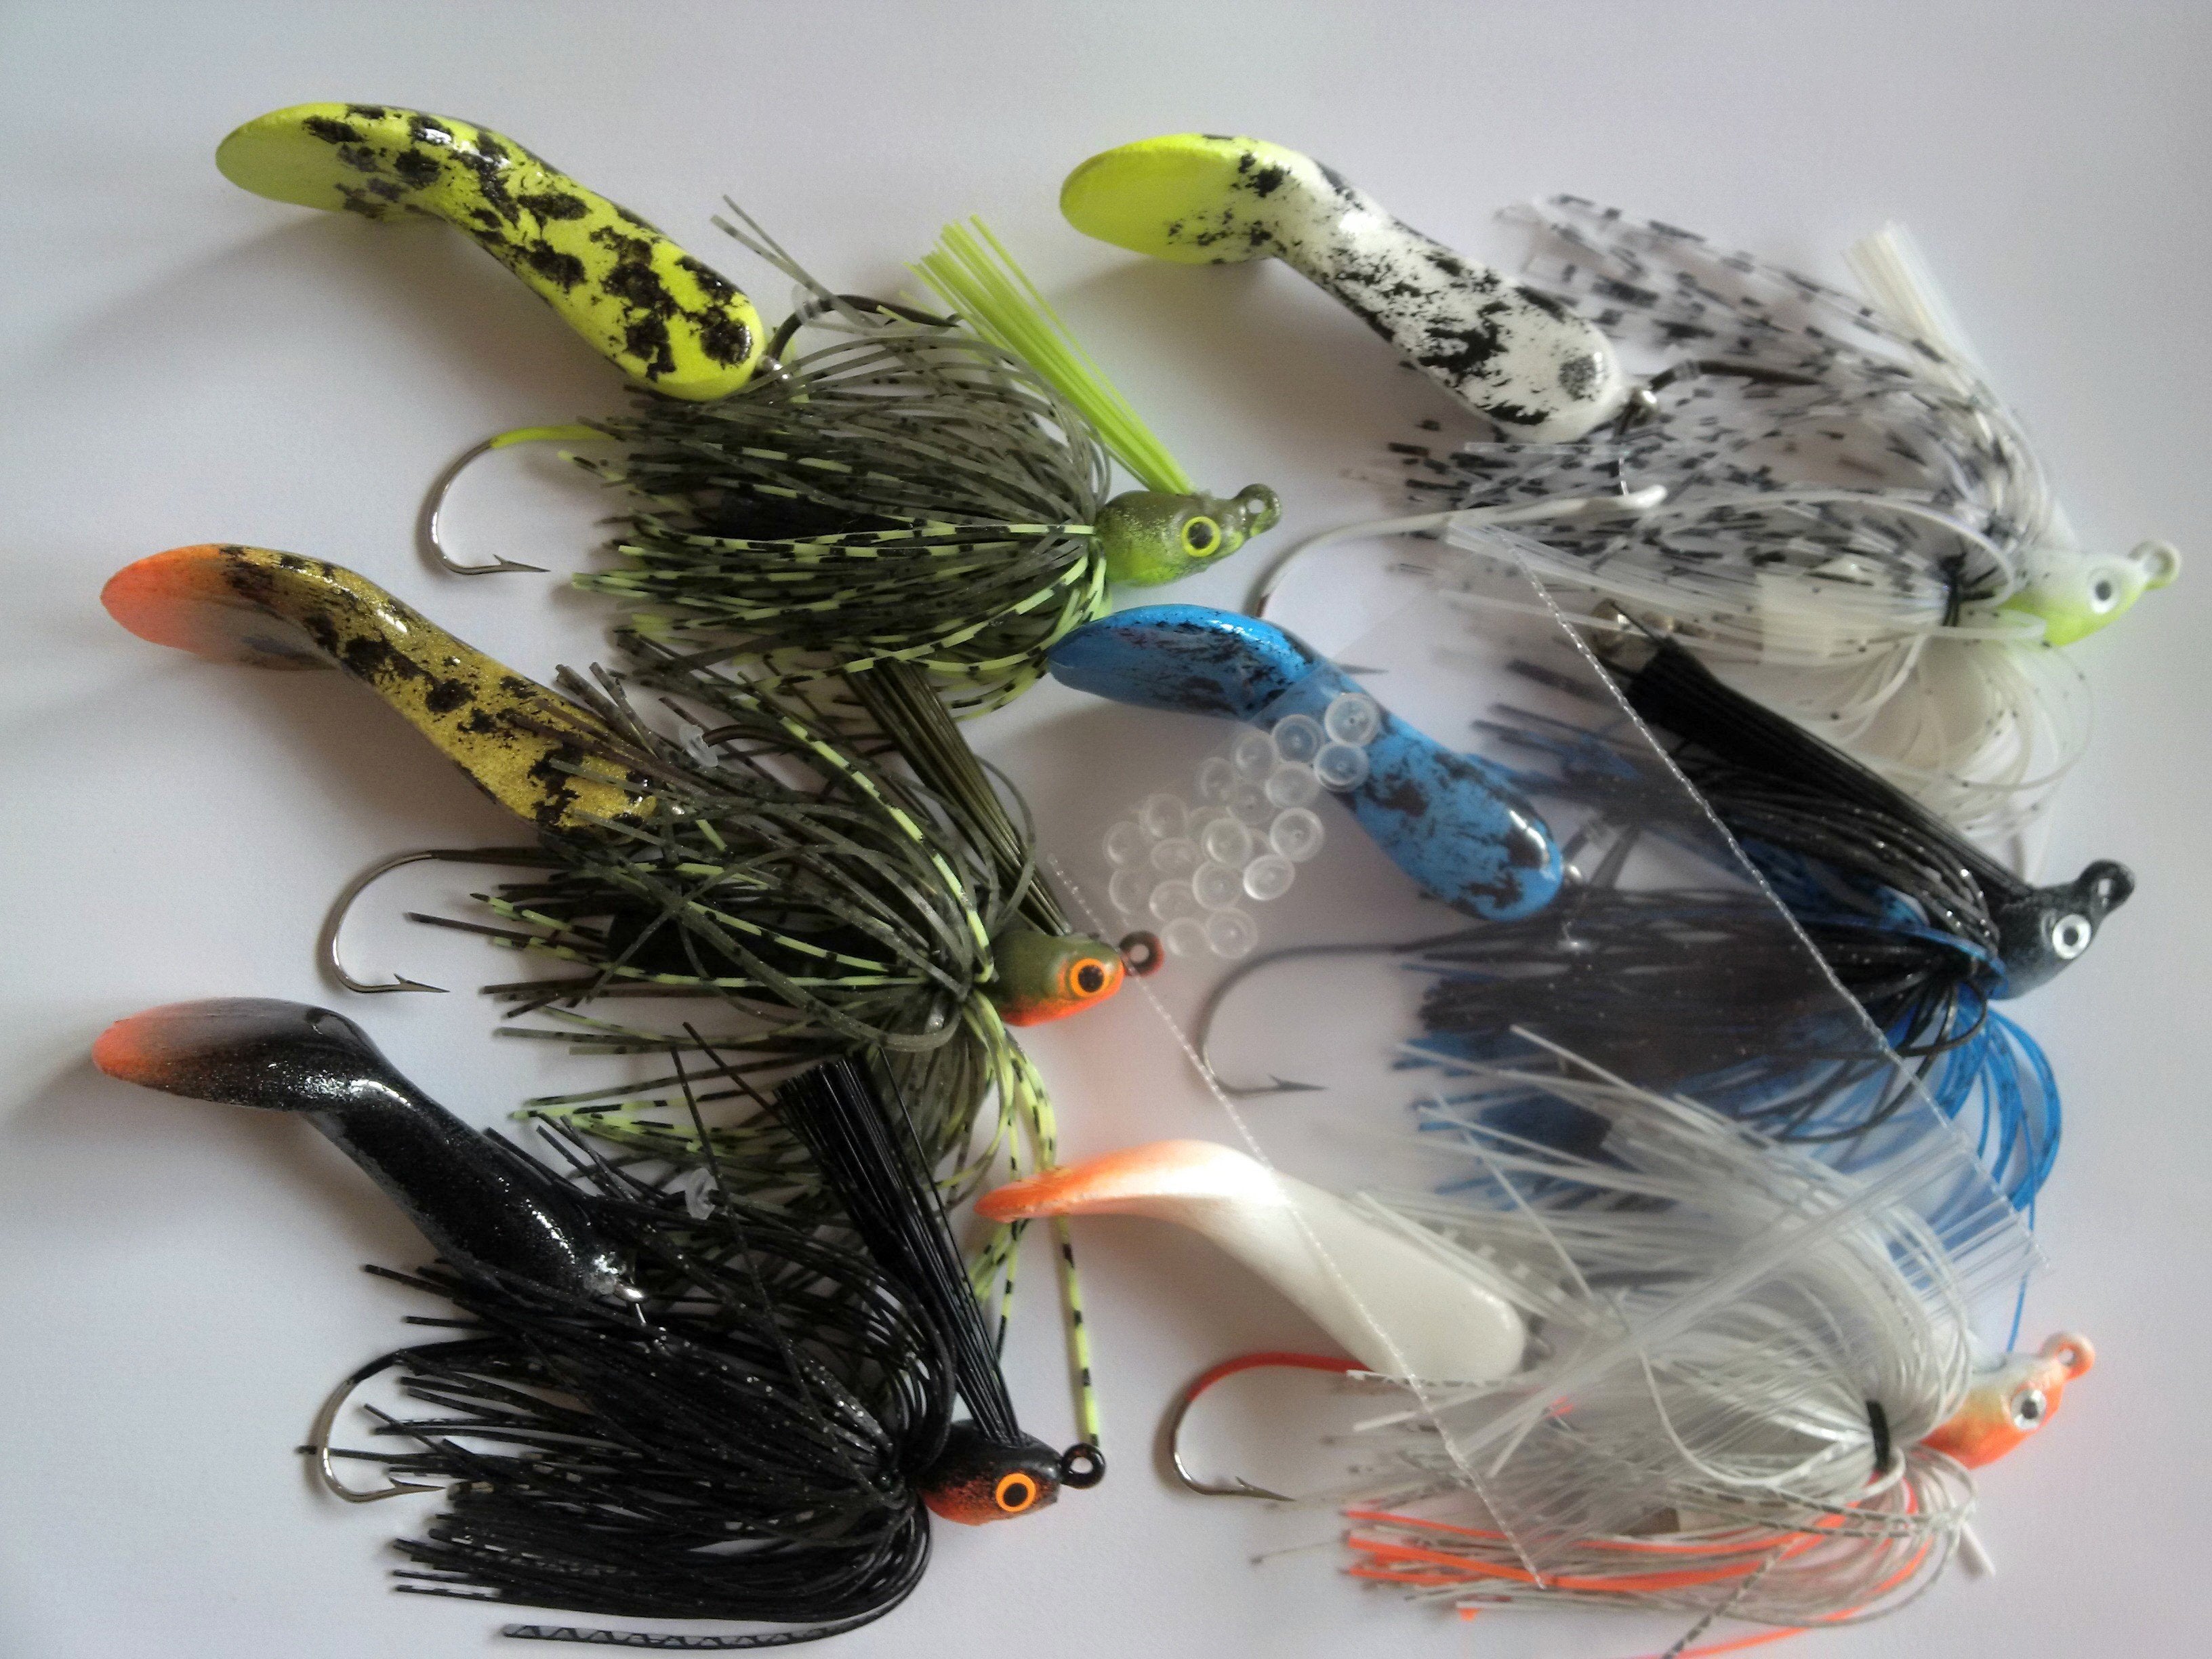 The best new bass lure for 2019 - Waggerbait™ swim jig – The Ugly Pike Bait  Co.